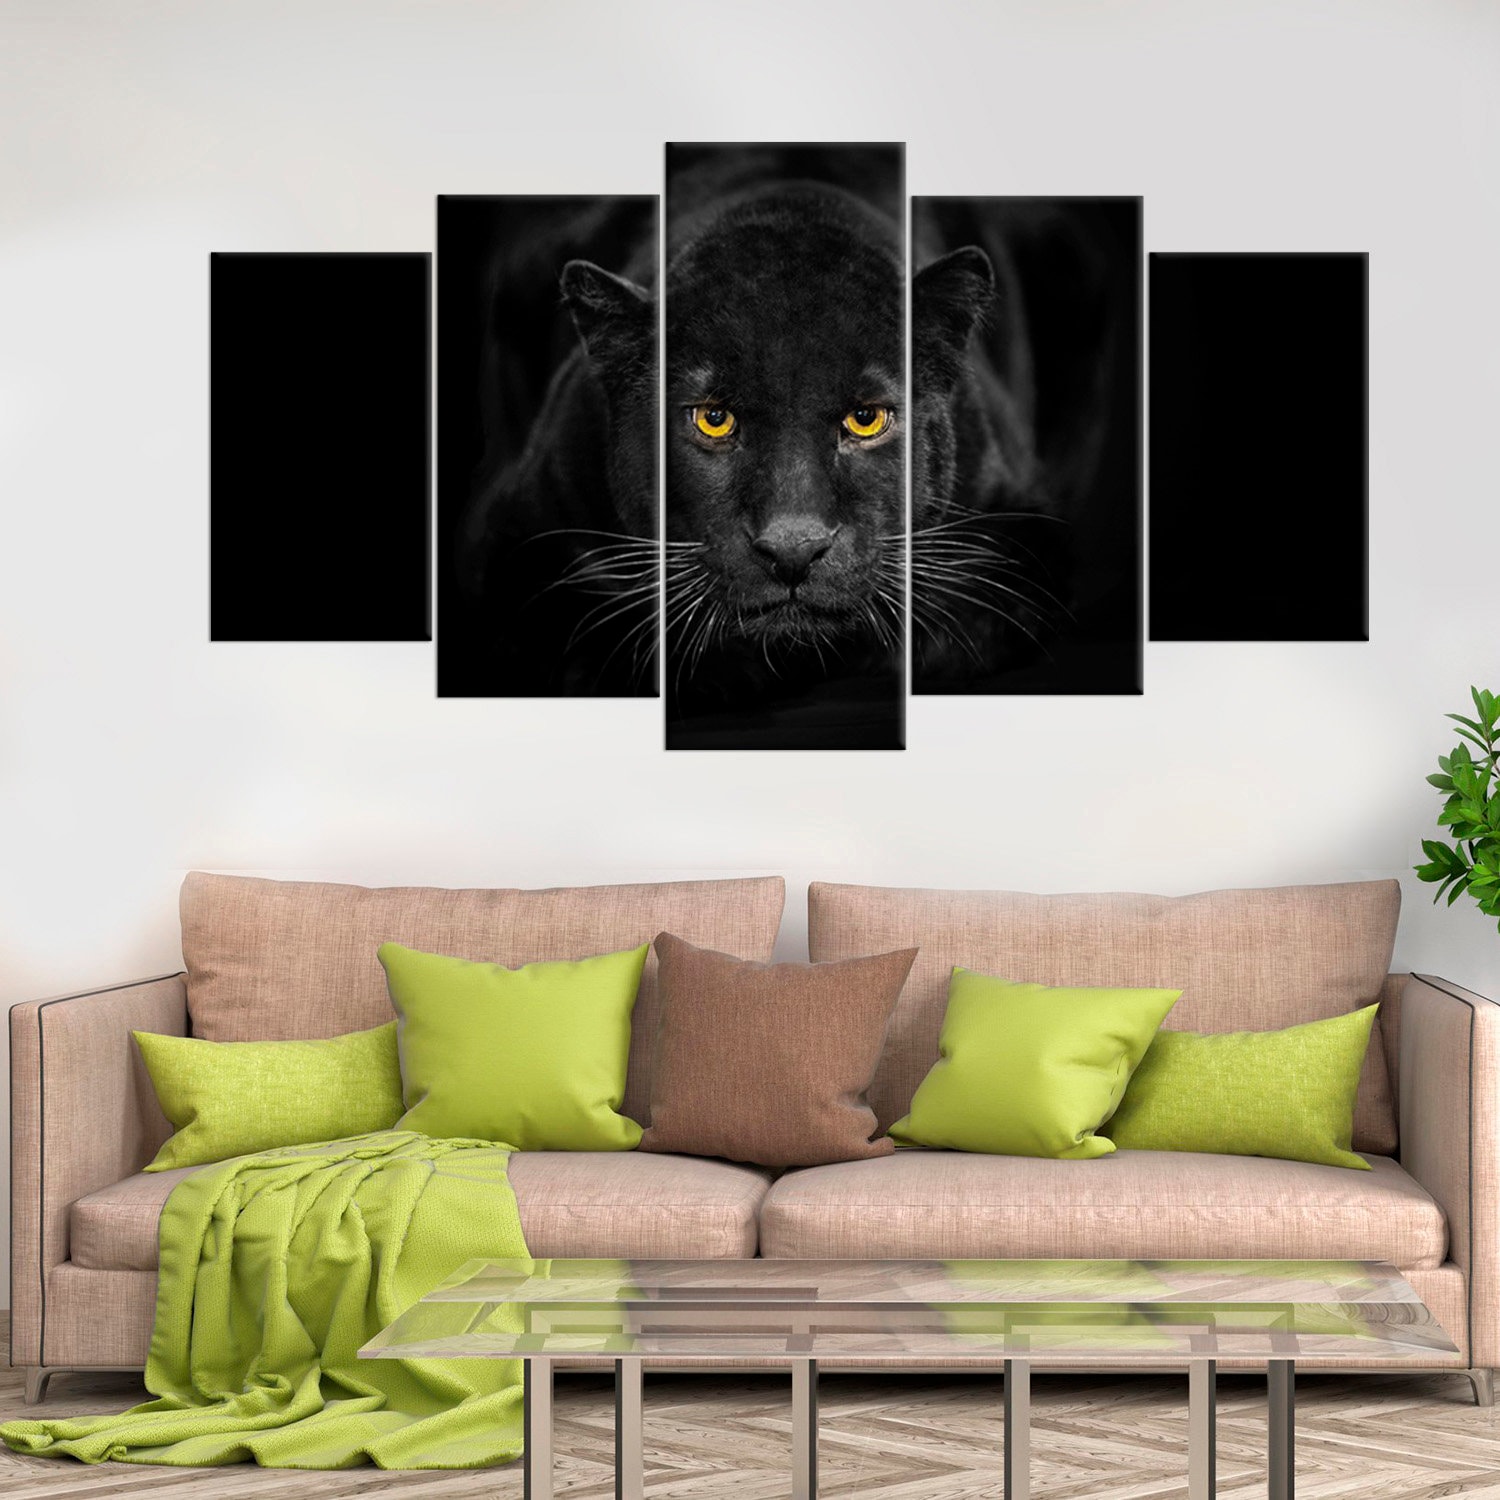 Black Panther Framed Canvas Print Animal Wall Art Leopard Wild | Etsy